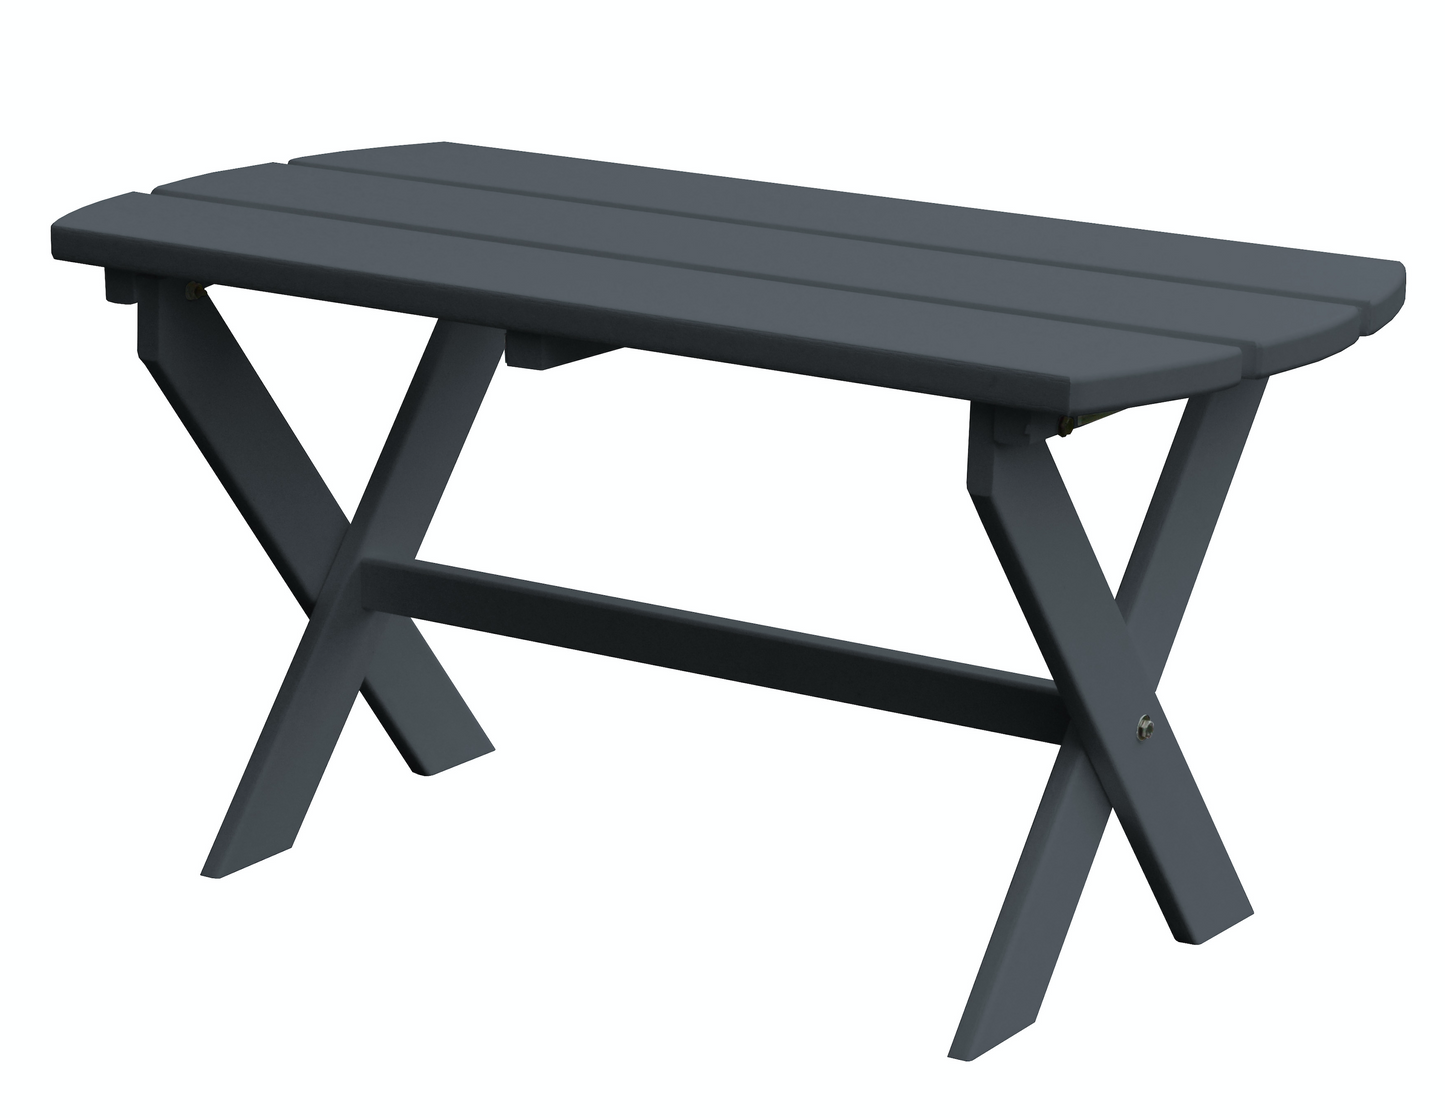 A&L Furniture Co. Amish Made Poly Folding Oval Coffee Table - LEAD TIME TO SHIP 10 BUSINESS DAYS